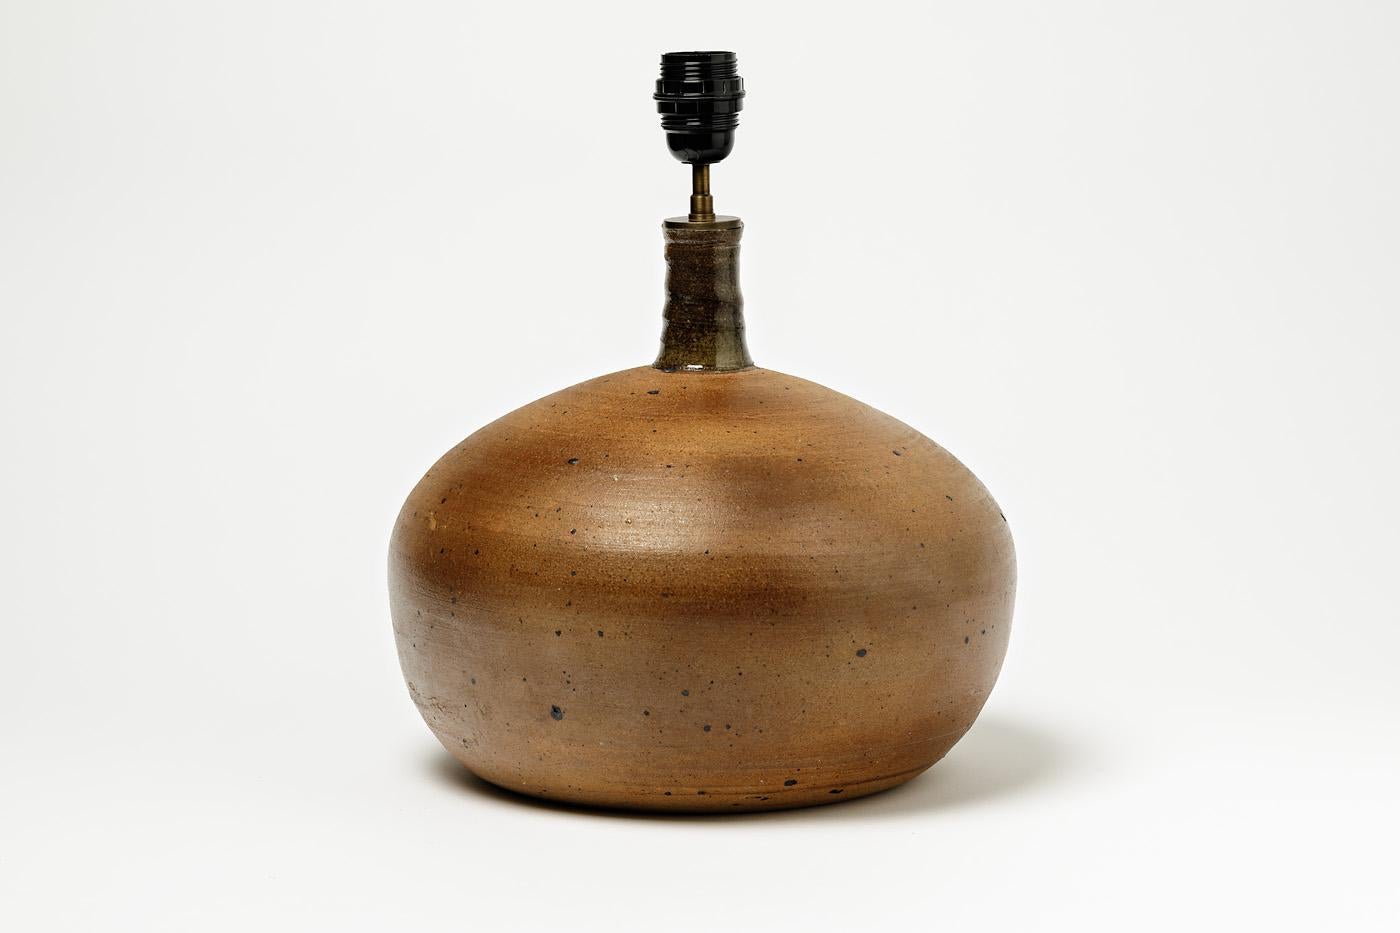 A stoneware table lamp by Pierre Digan to La Borne.
Signed at the base.
Perfect conditions,
circa 1970.
Dimensions: 29 x 29 cm / 11' 1/2 x 11' 1/ 2 inches (without electrical system)
 39 x 29 cm / 15' 1/3 x 11' 1/2 inches (with electrical